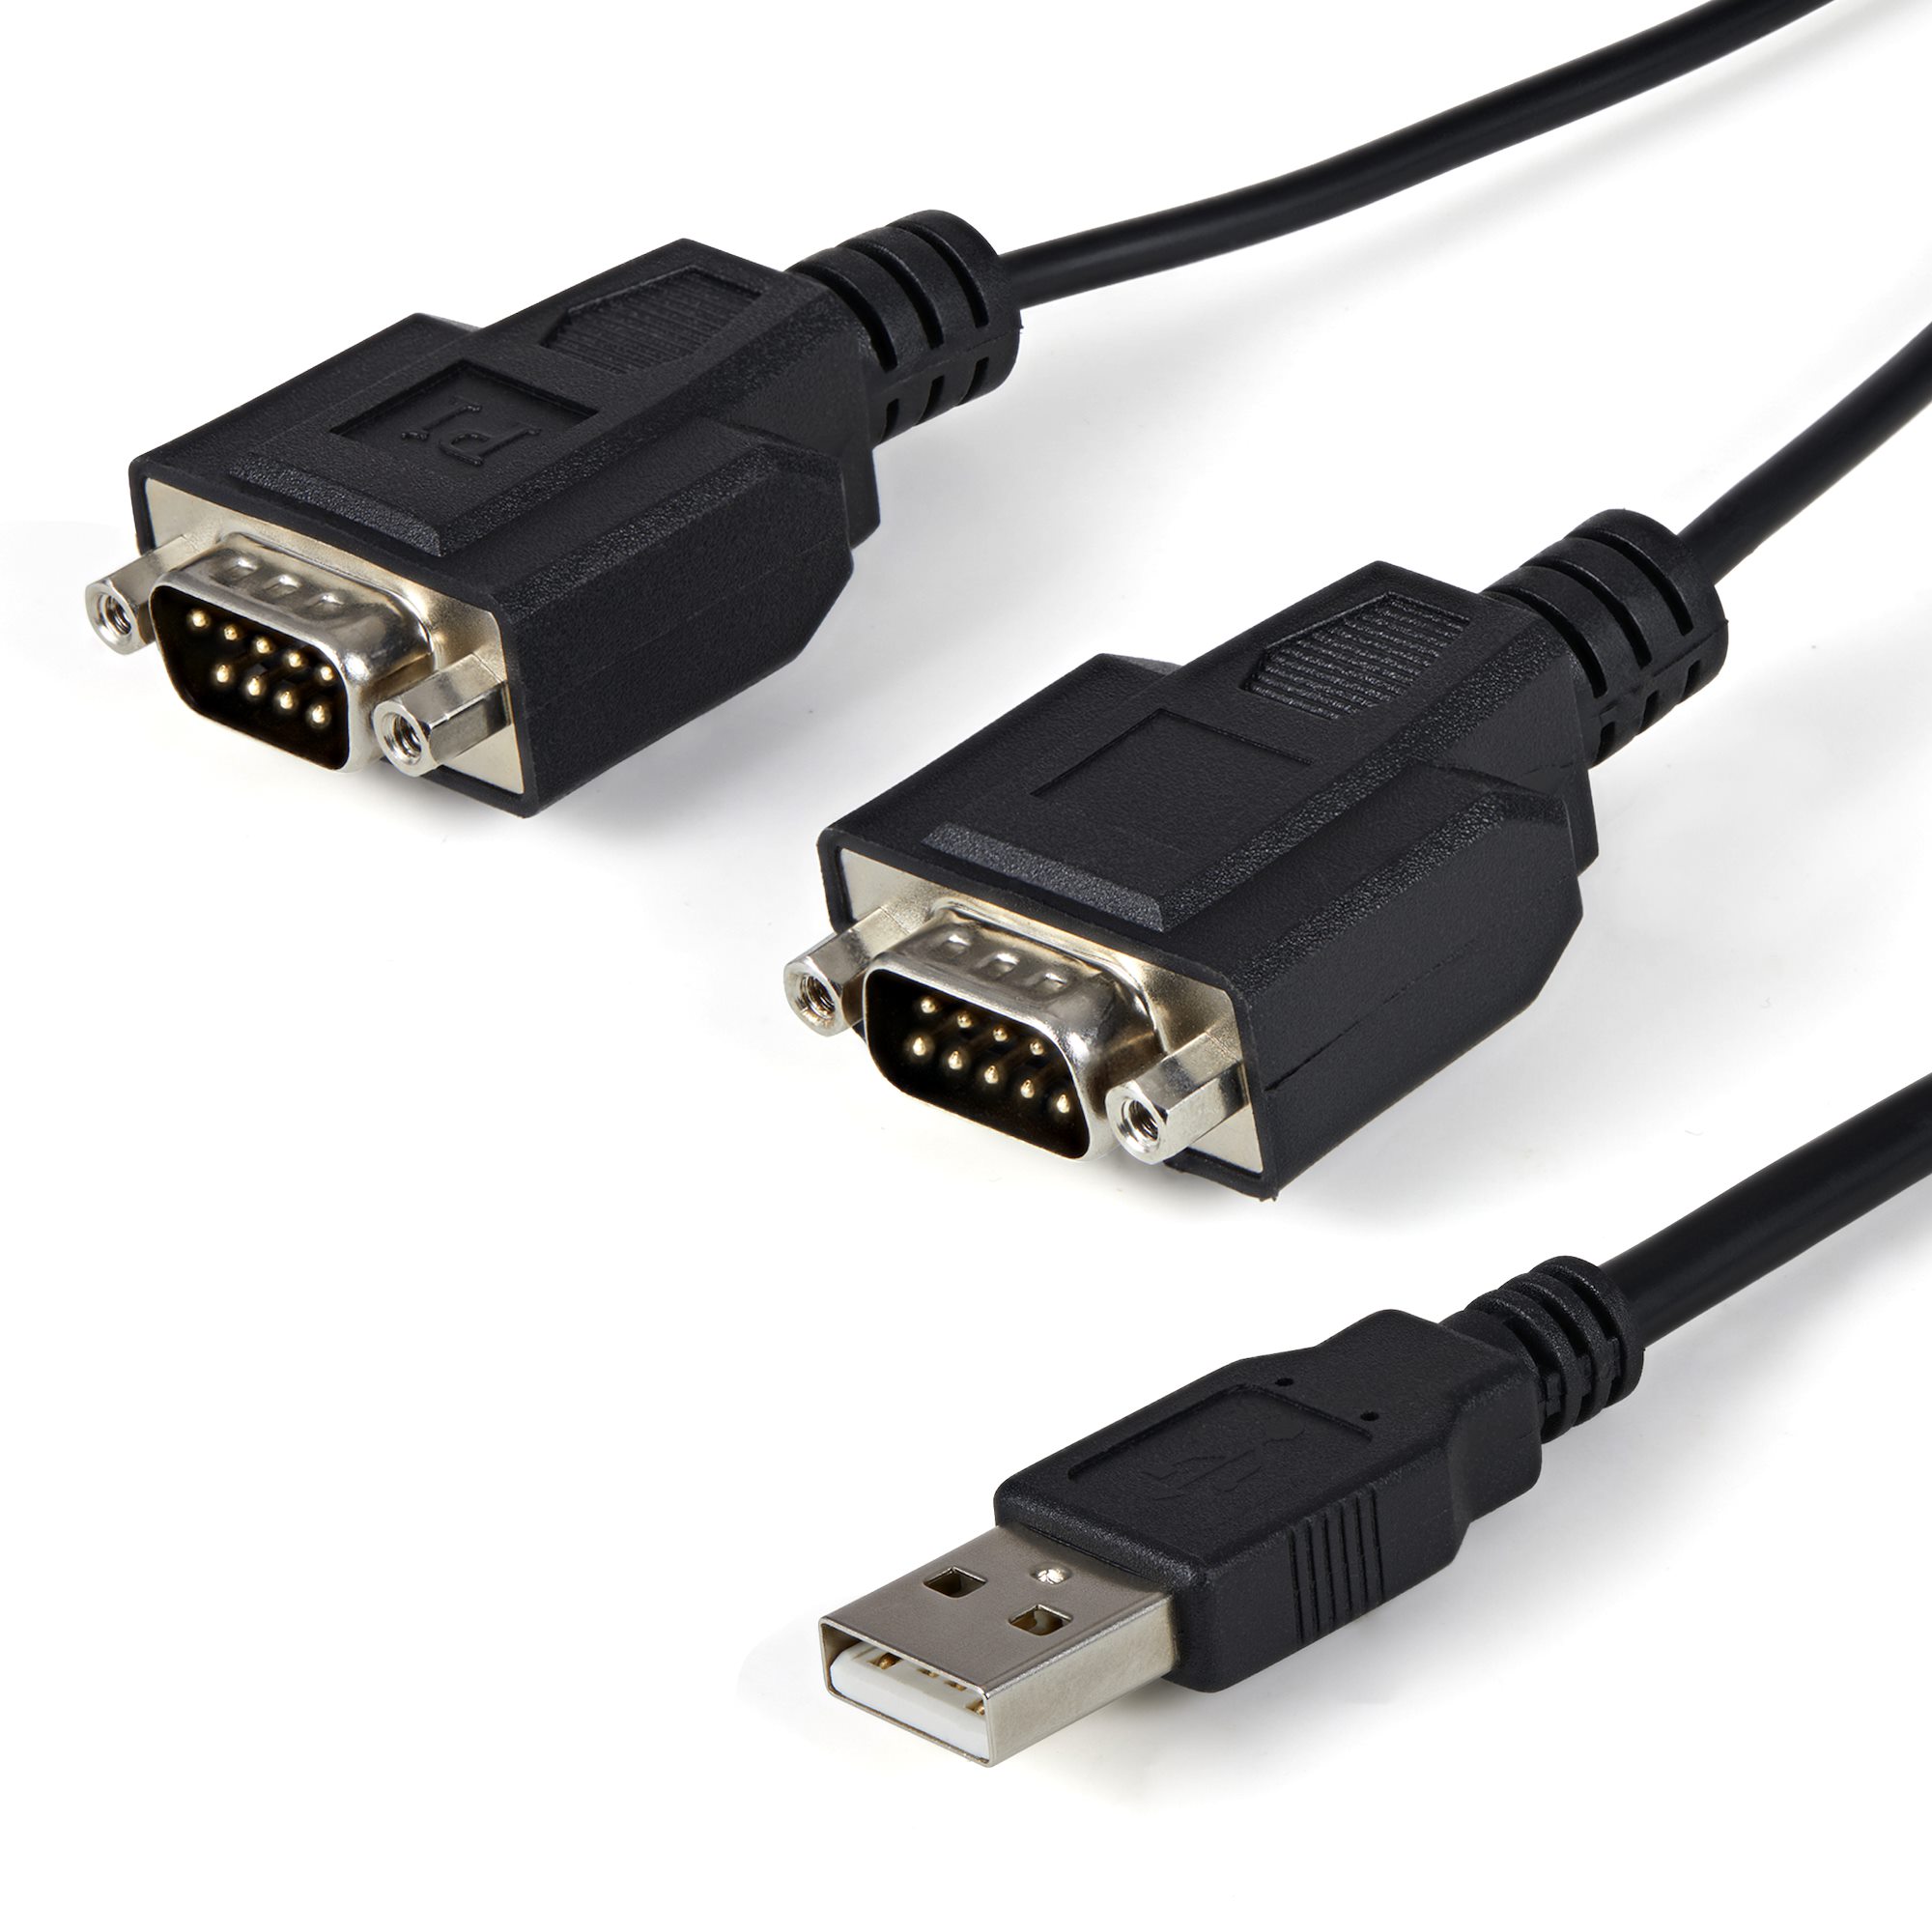 Kejser krystal Lighed FTDI USB to Serial Adapter Cable w/ COM - Serial Cards & Adapters |  StarTech.com